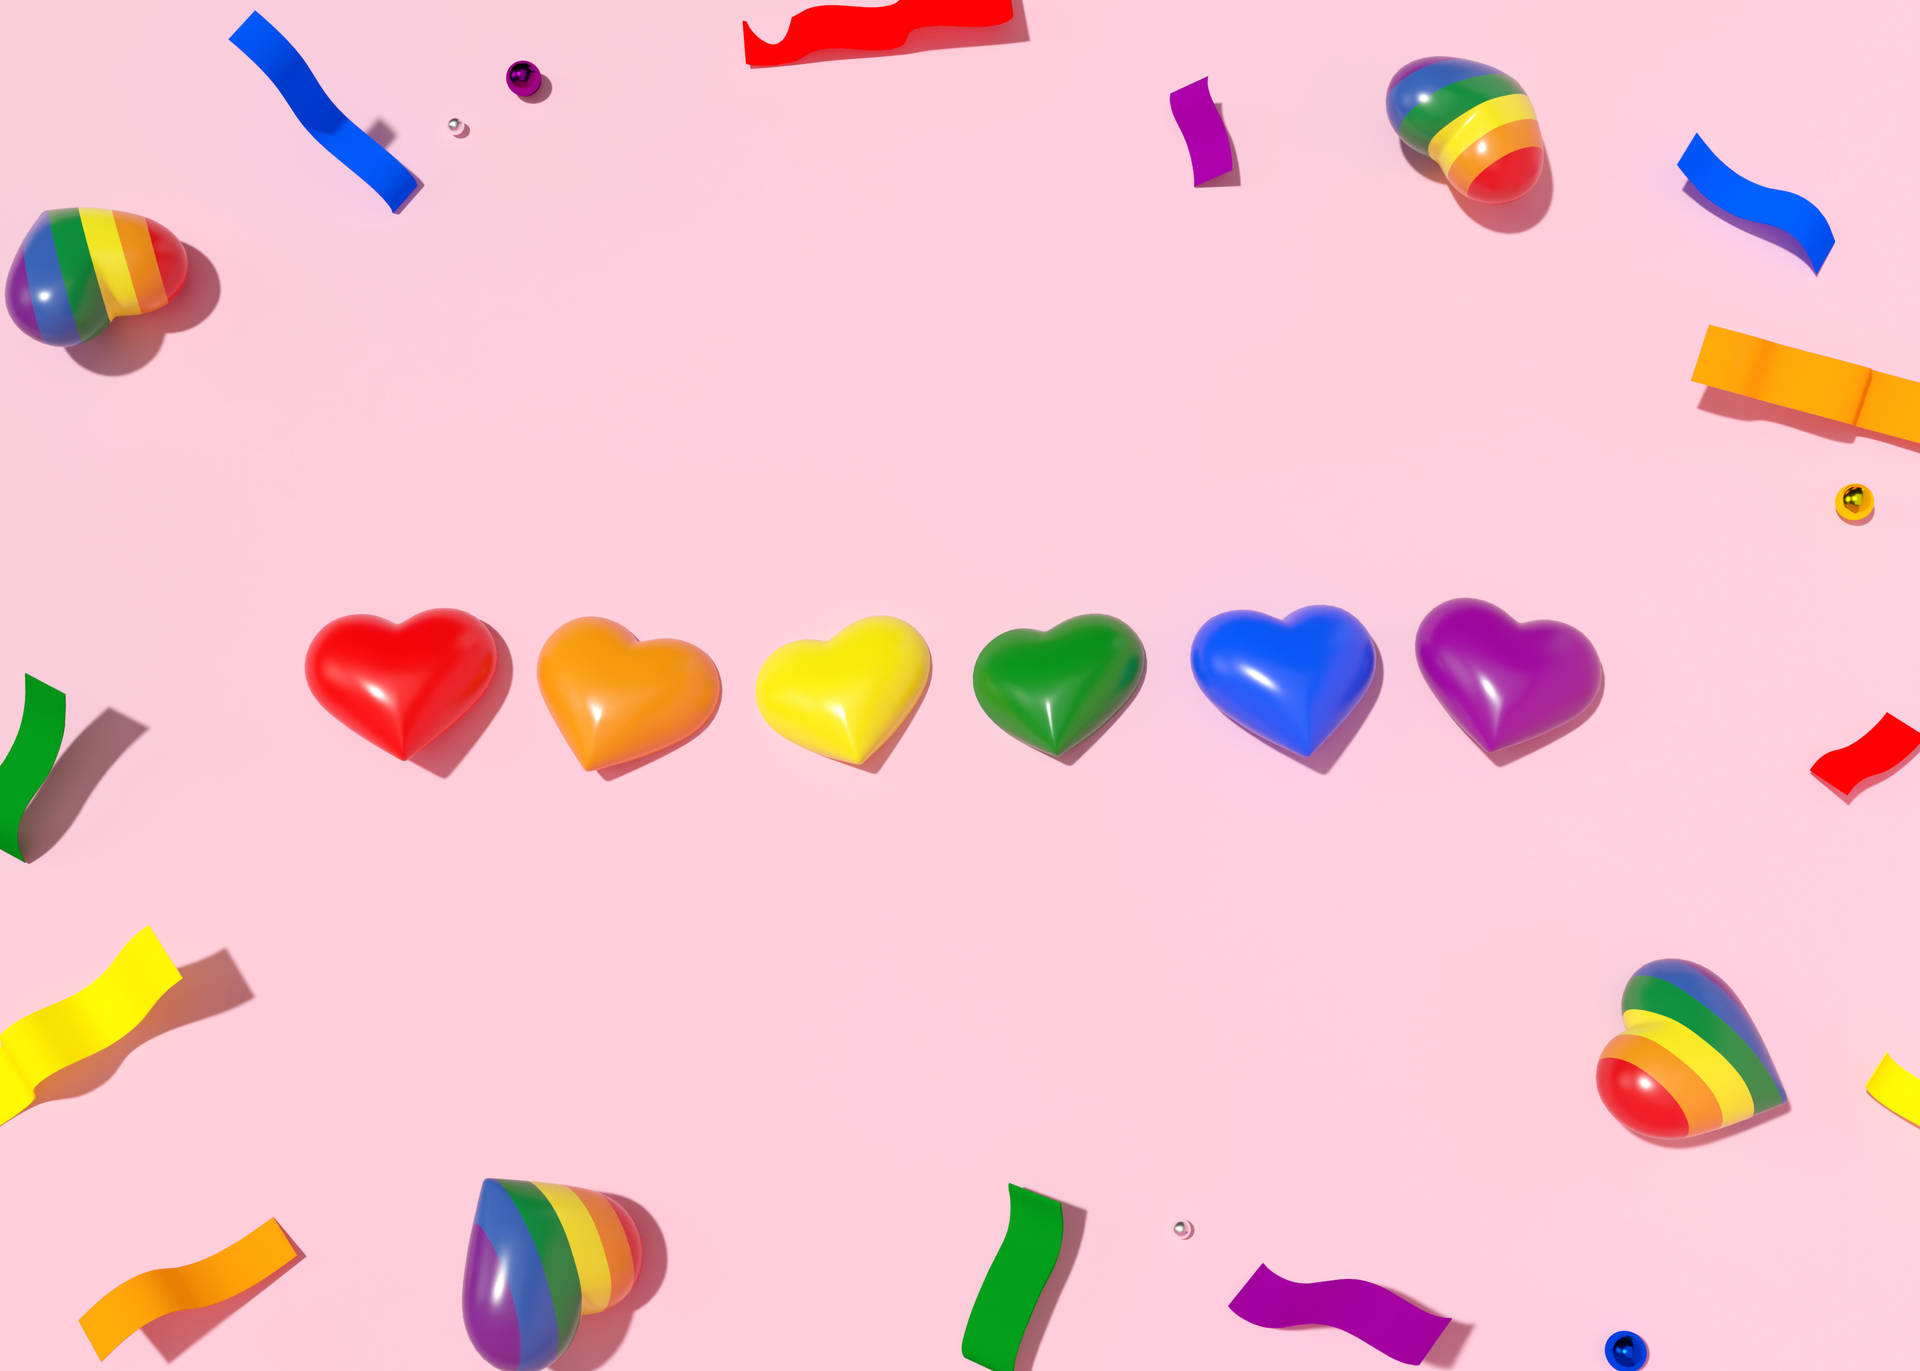 Rainbow-colored Aesthetic Heart Shapes Wallpaper